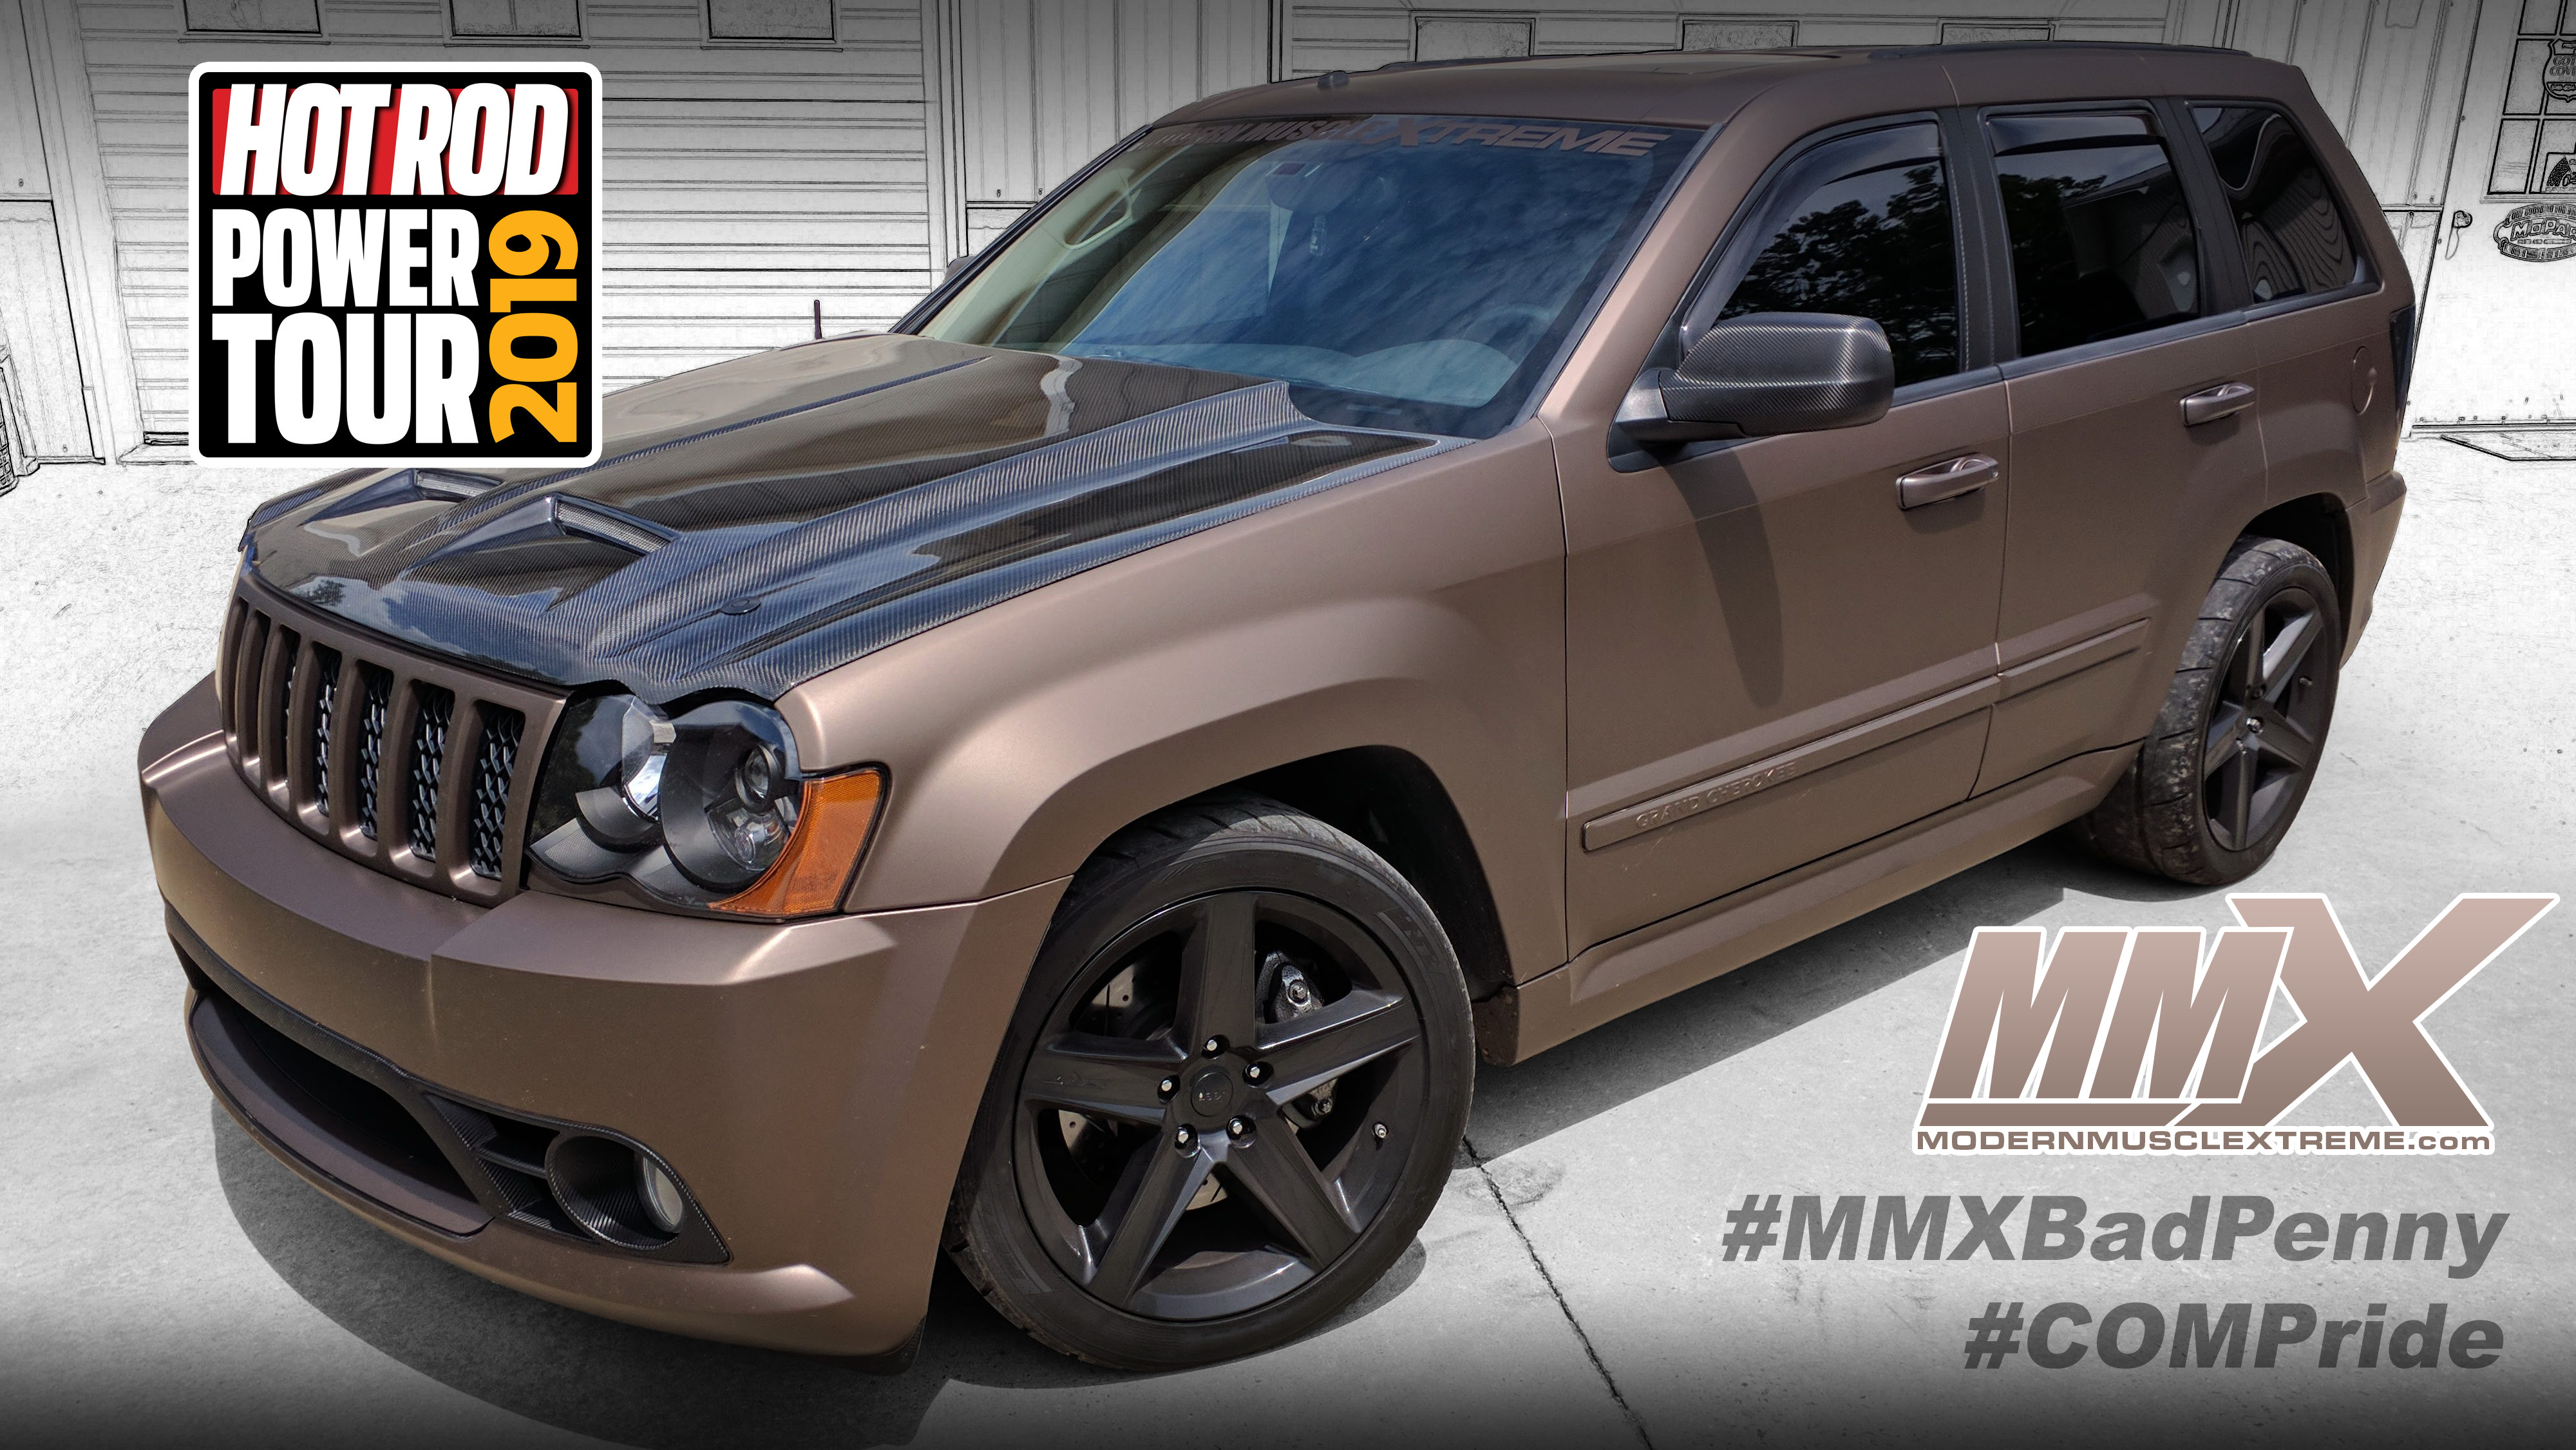 2008 Jeep SRT8 Build and Whipple Supercharged Shop Build by MMX / Modern Muscle Performance